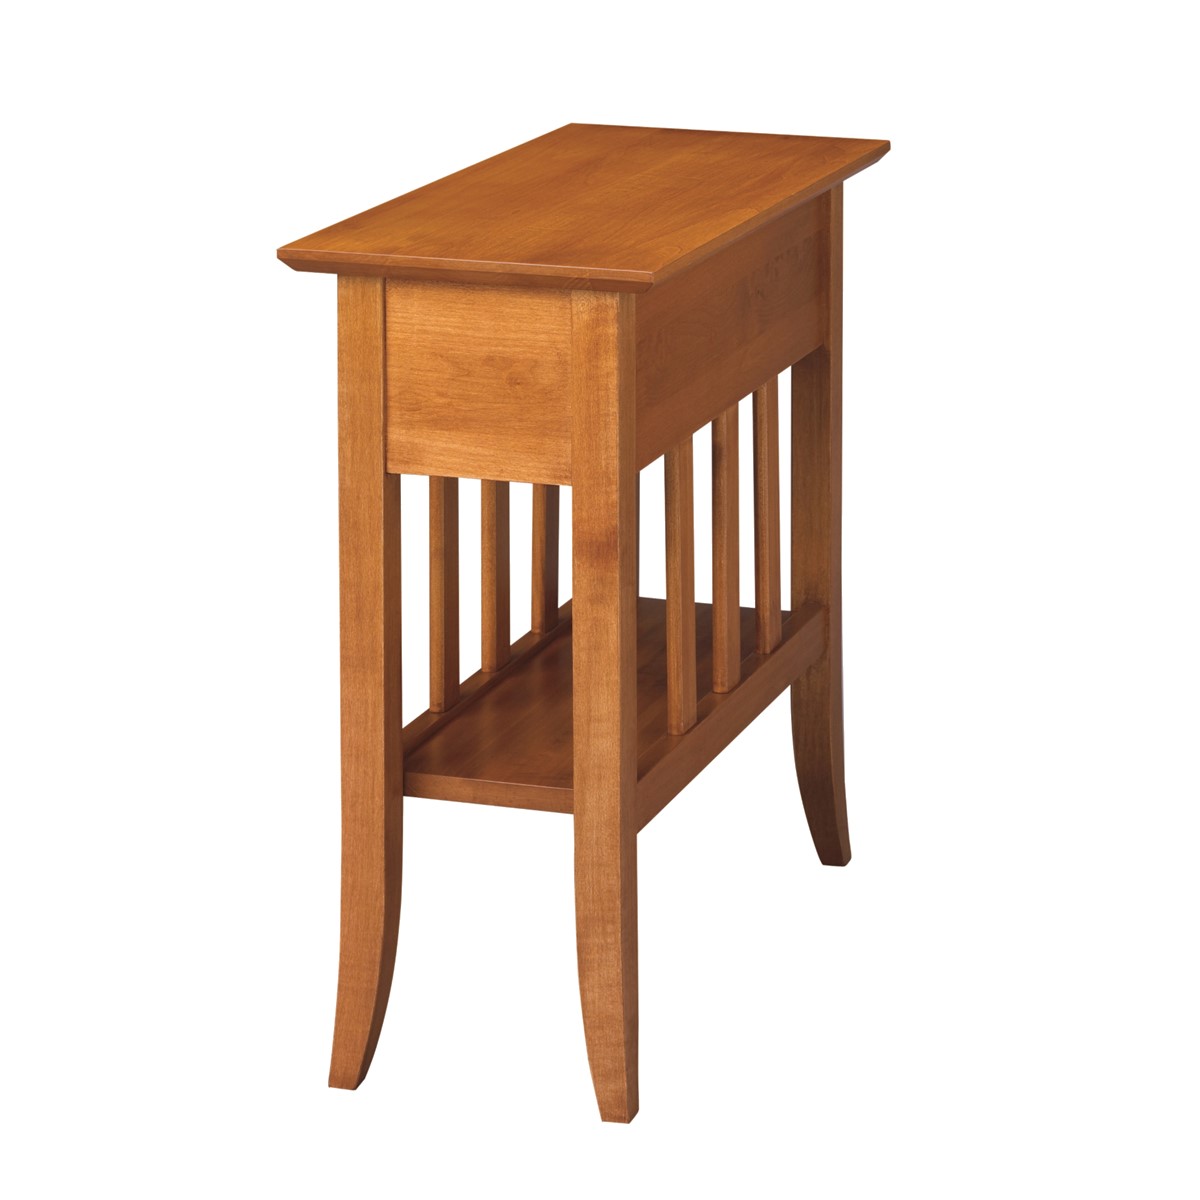 Passages: Chairside Table with Shelf